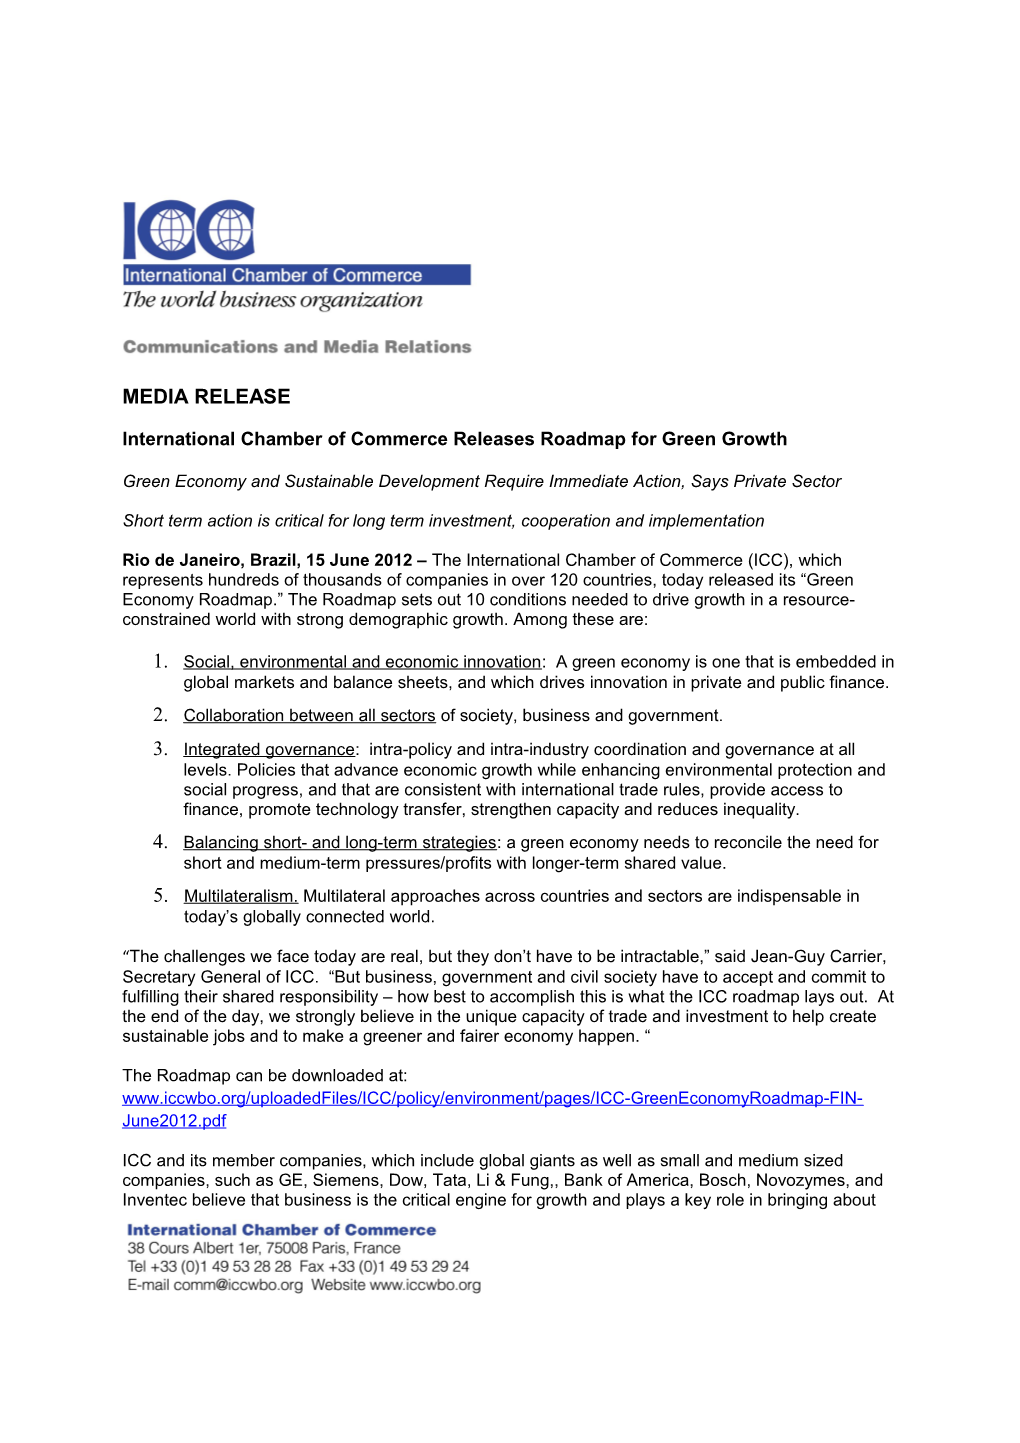 International Chamber of Commerce Releases Roadmap for Green Growth